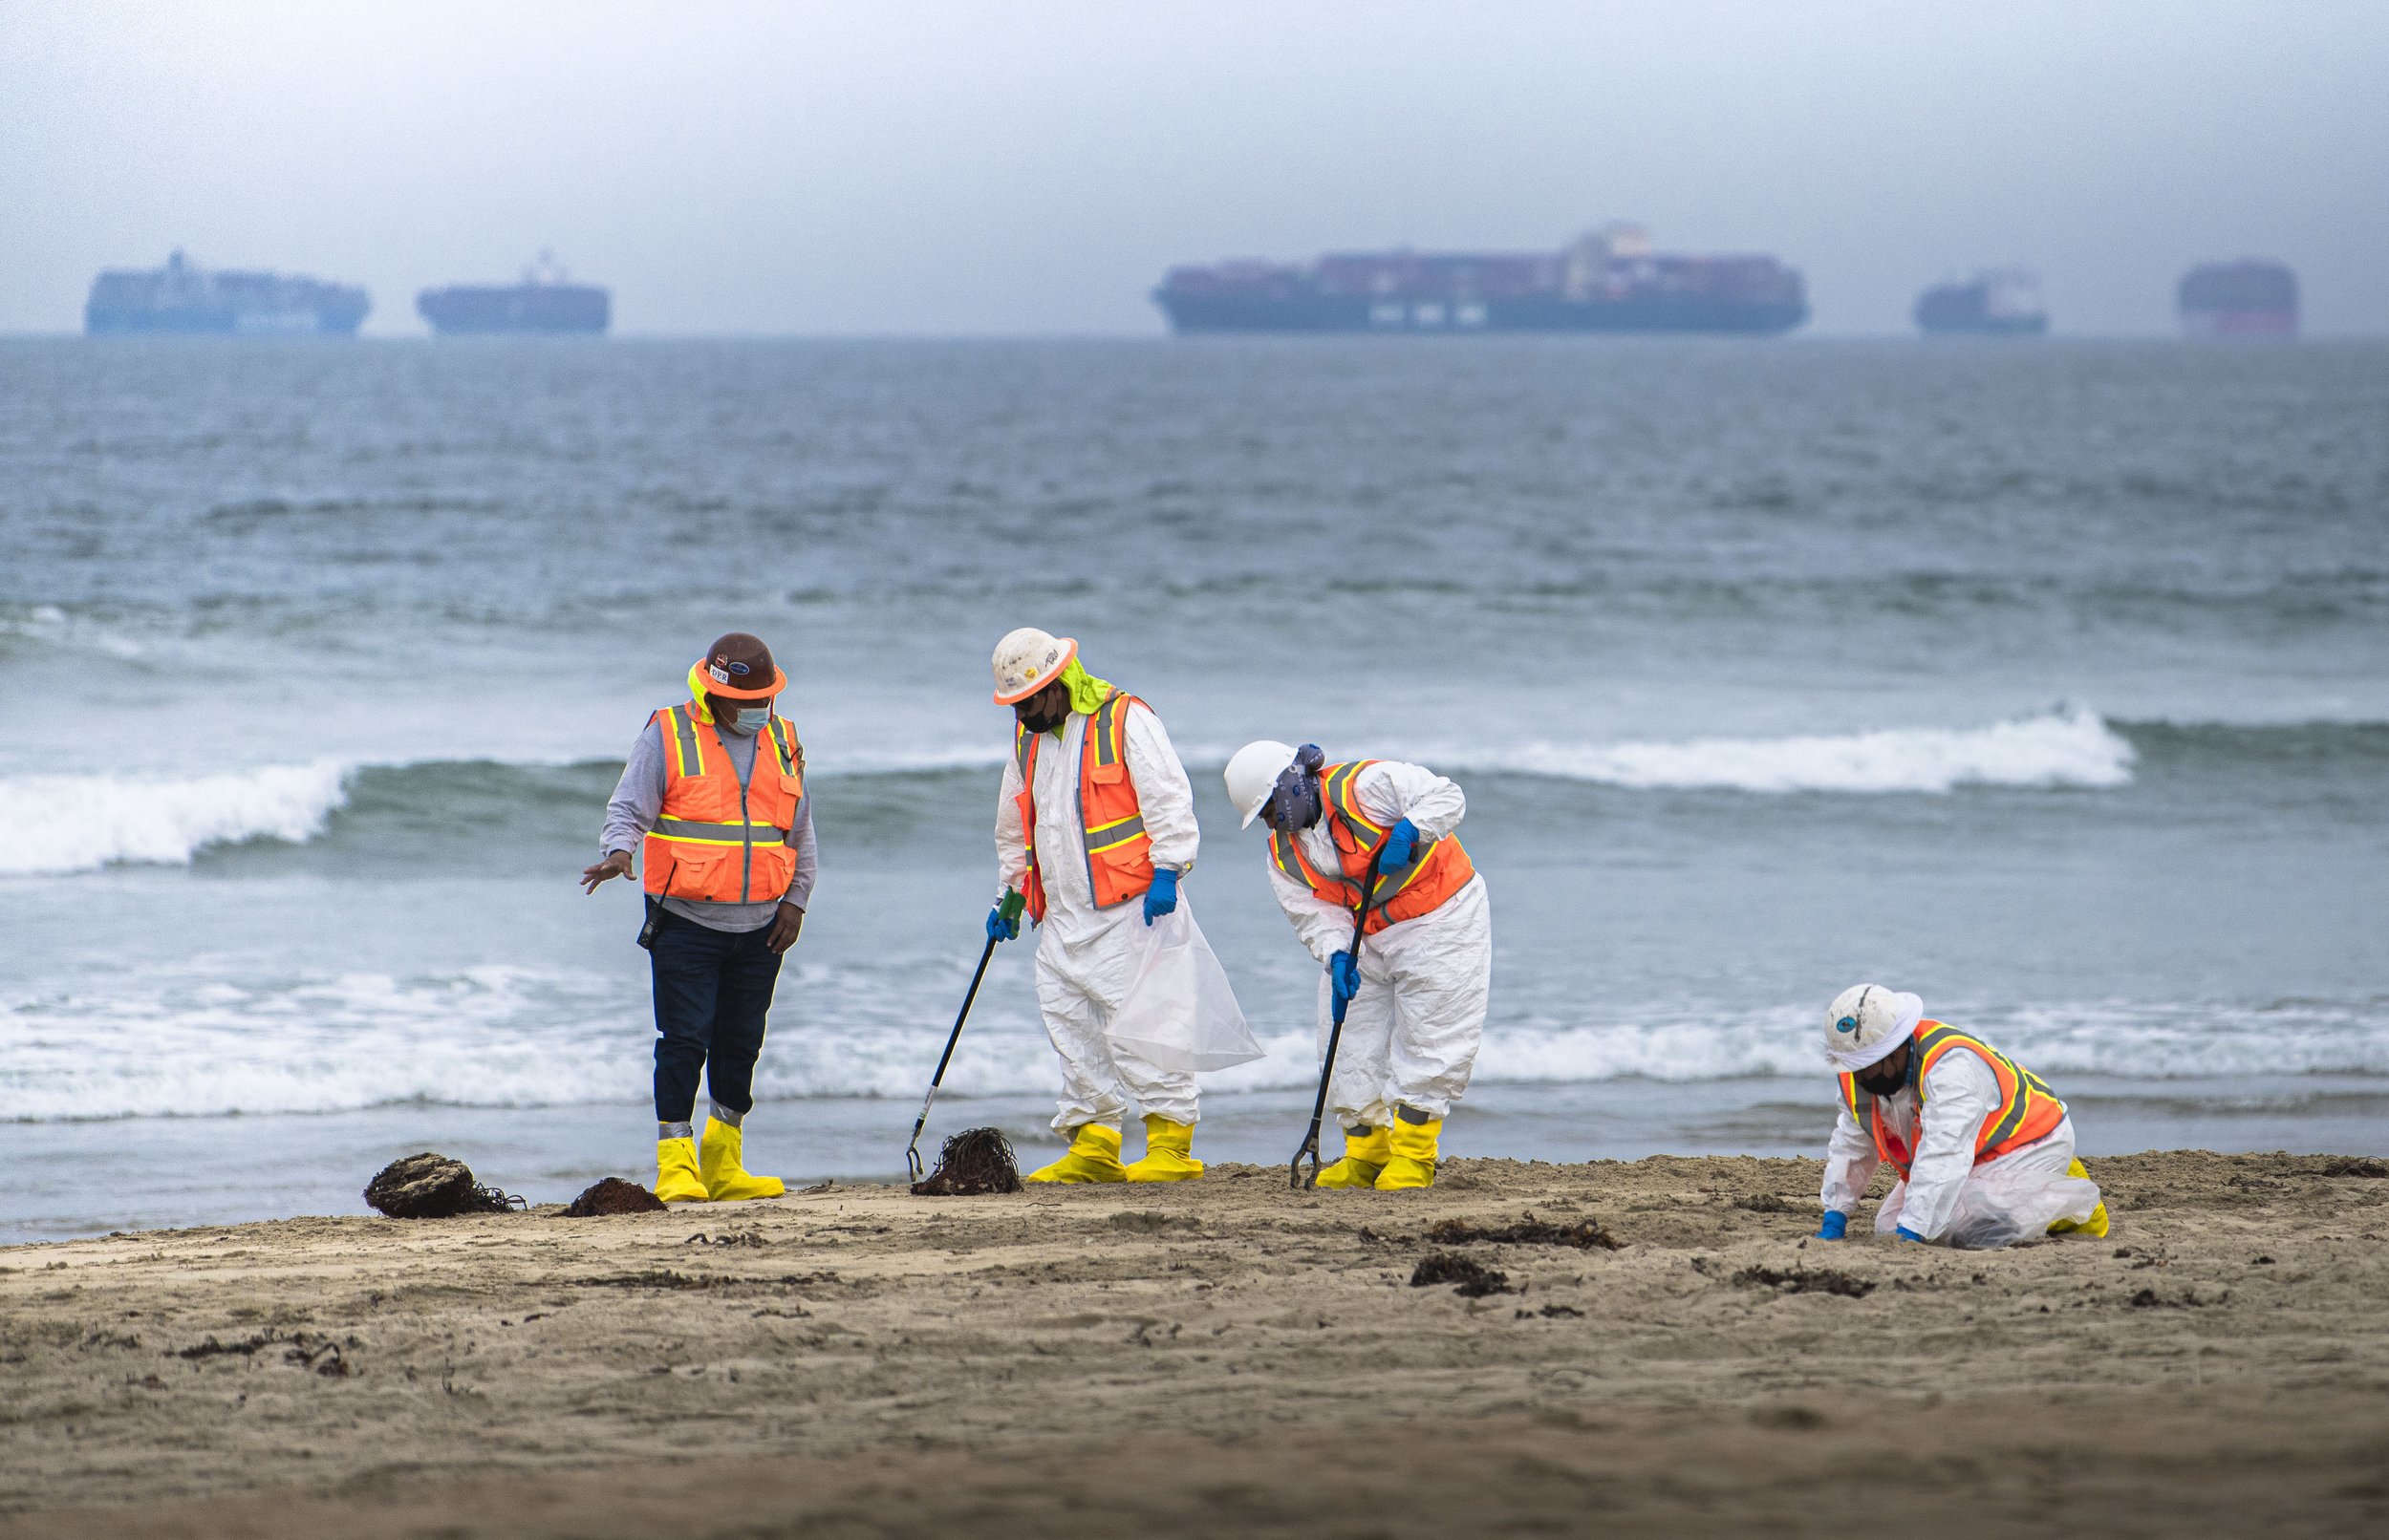  Cleanup crews from the US Ecology agency, the leading provider of environmental, emergency and disaster response check the beach's of Huntington Beach, Calif for any washed up oil after the recent oil spill that occured in Orange County, Calif. on O